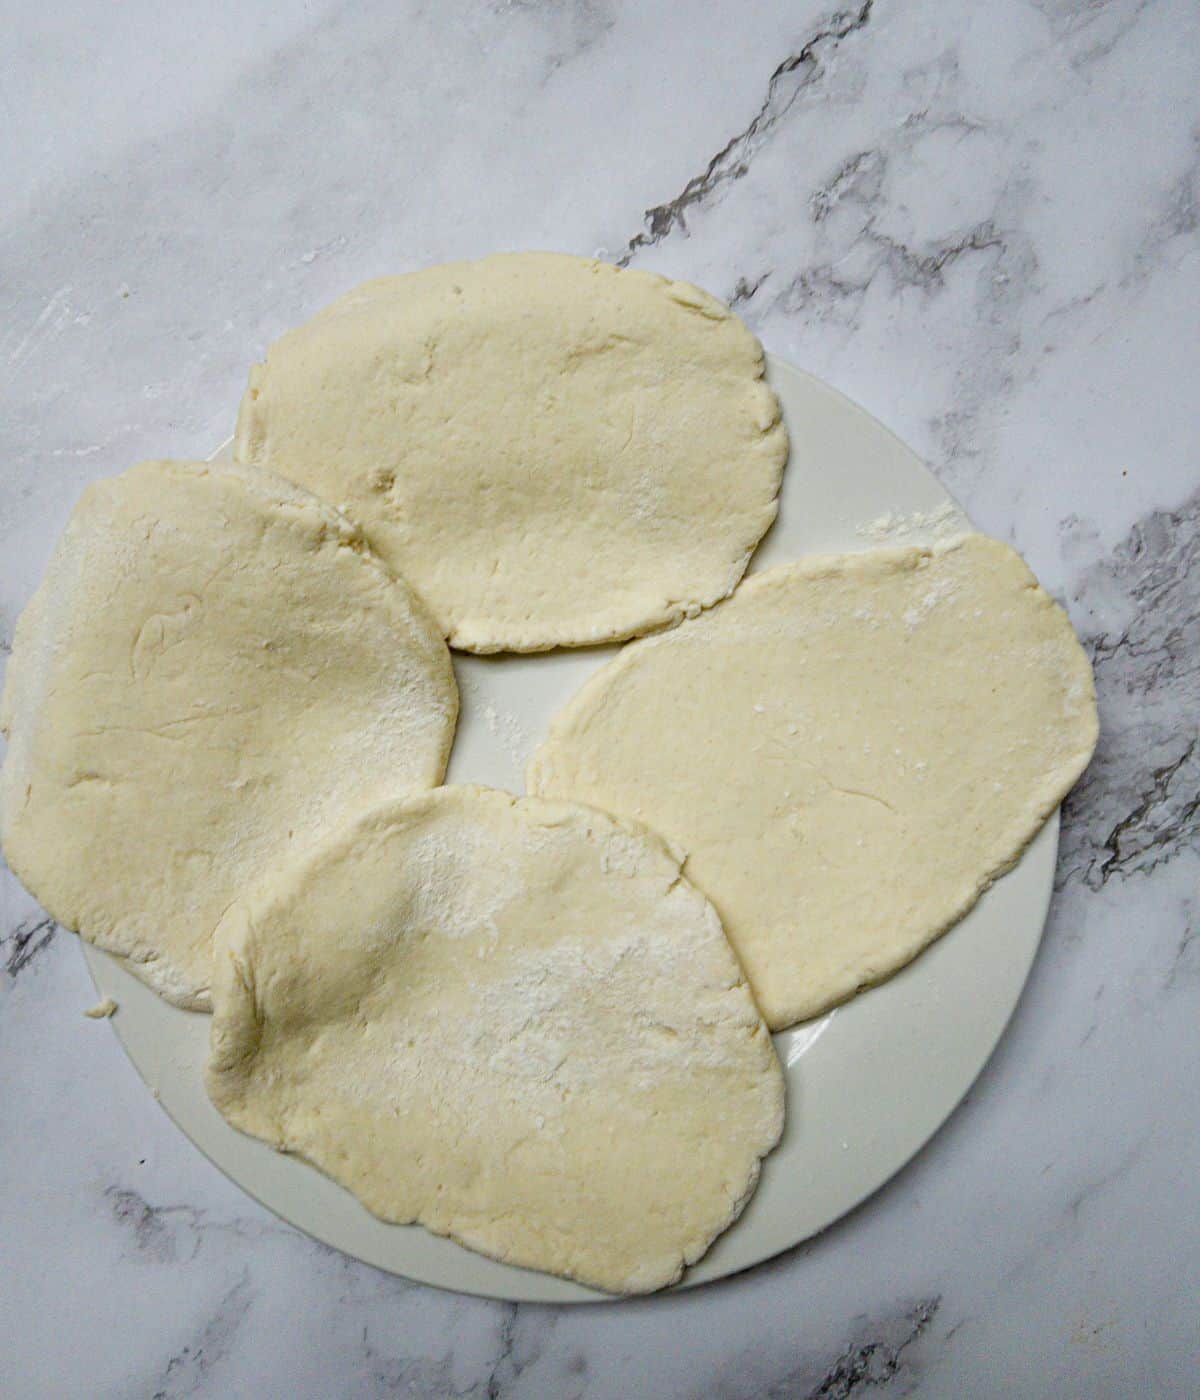 Uncooked homemade gluten free naan breads on a white plate.